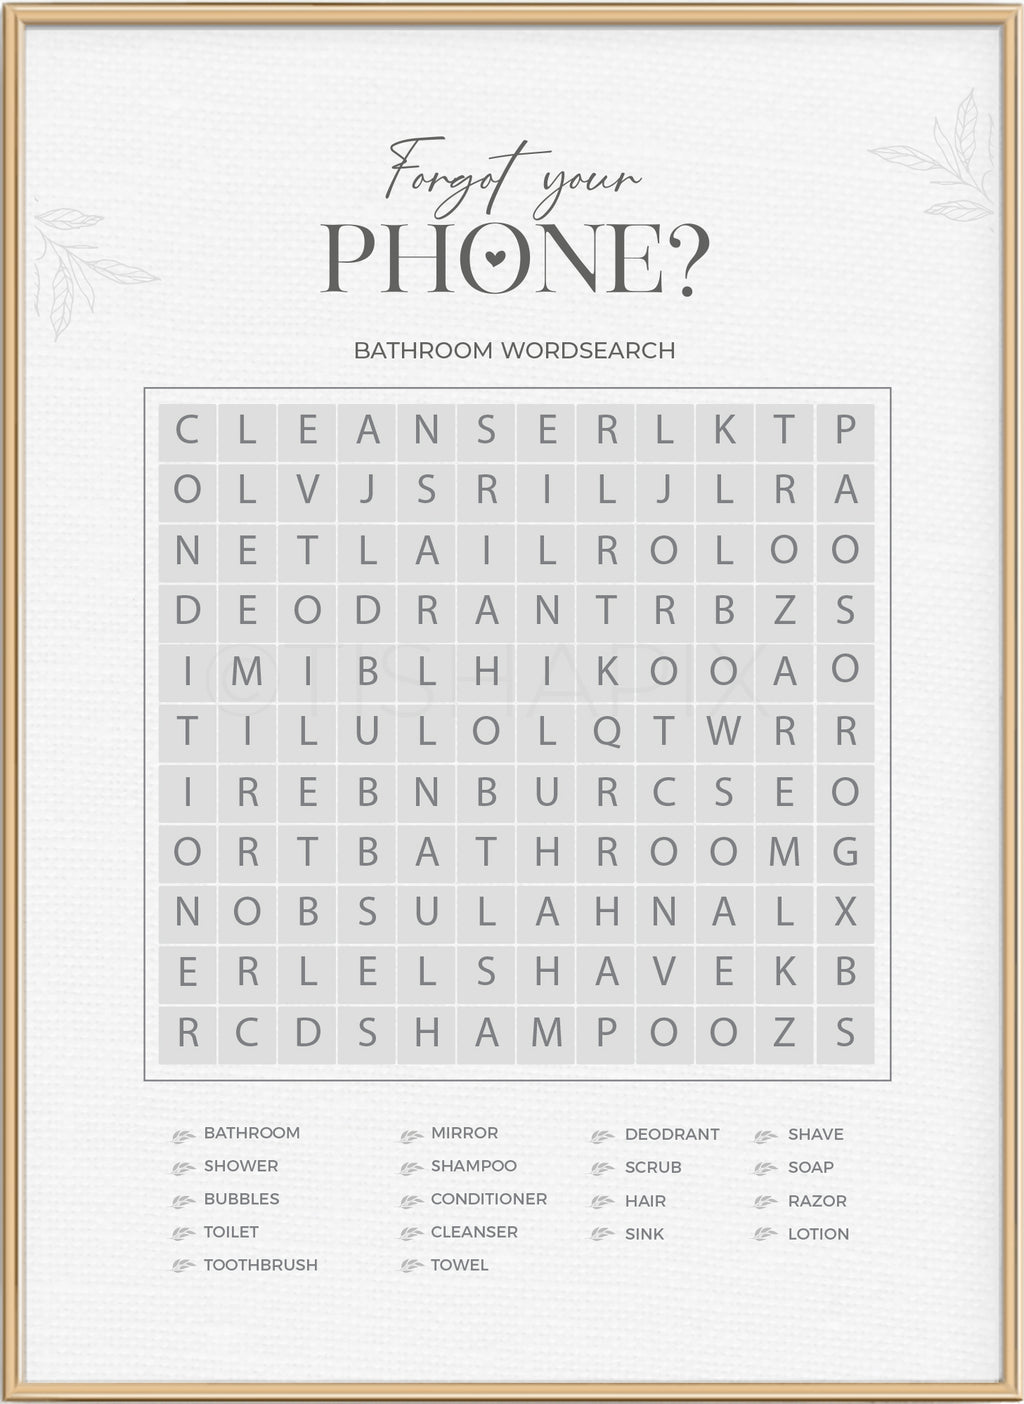 Forgot Your Phone? - Wordsearch